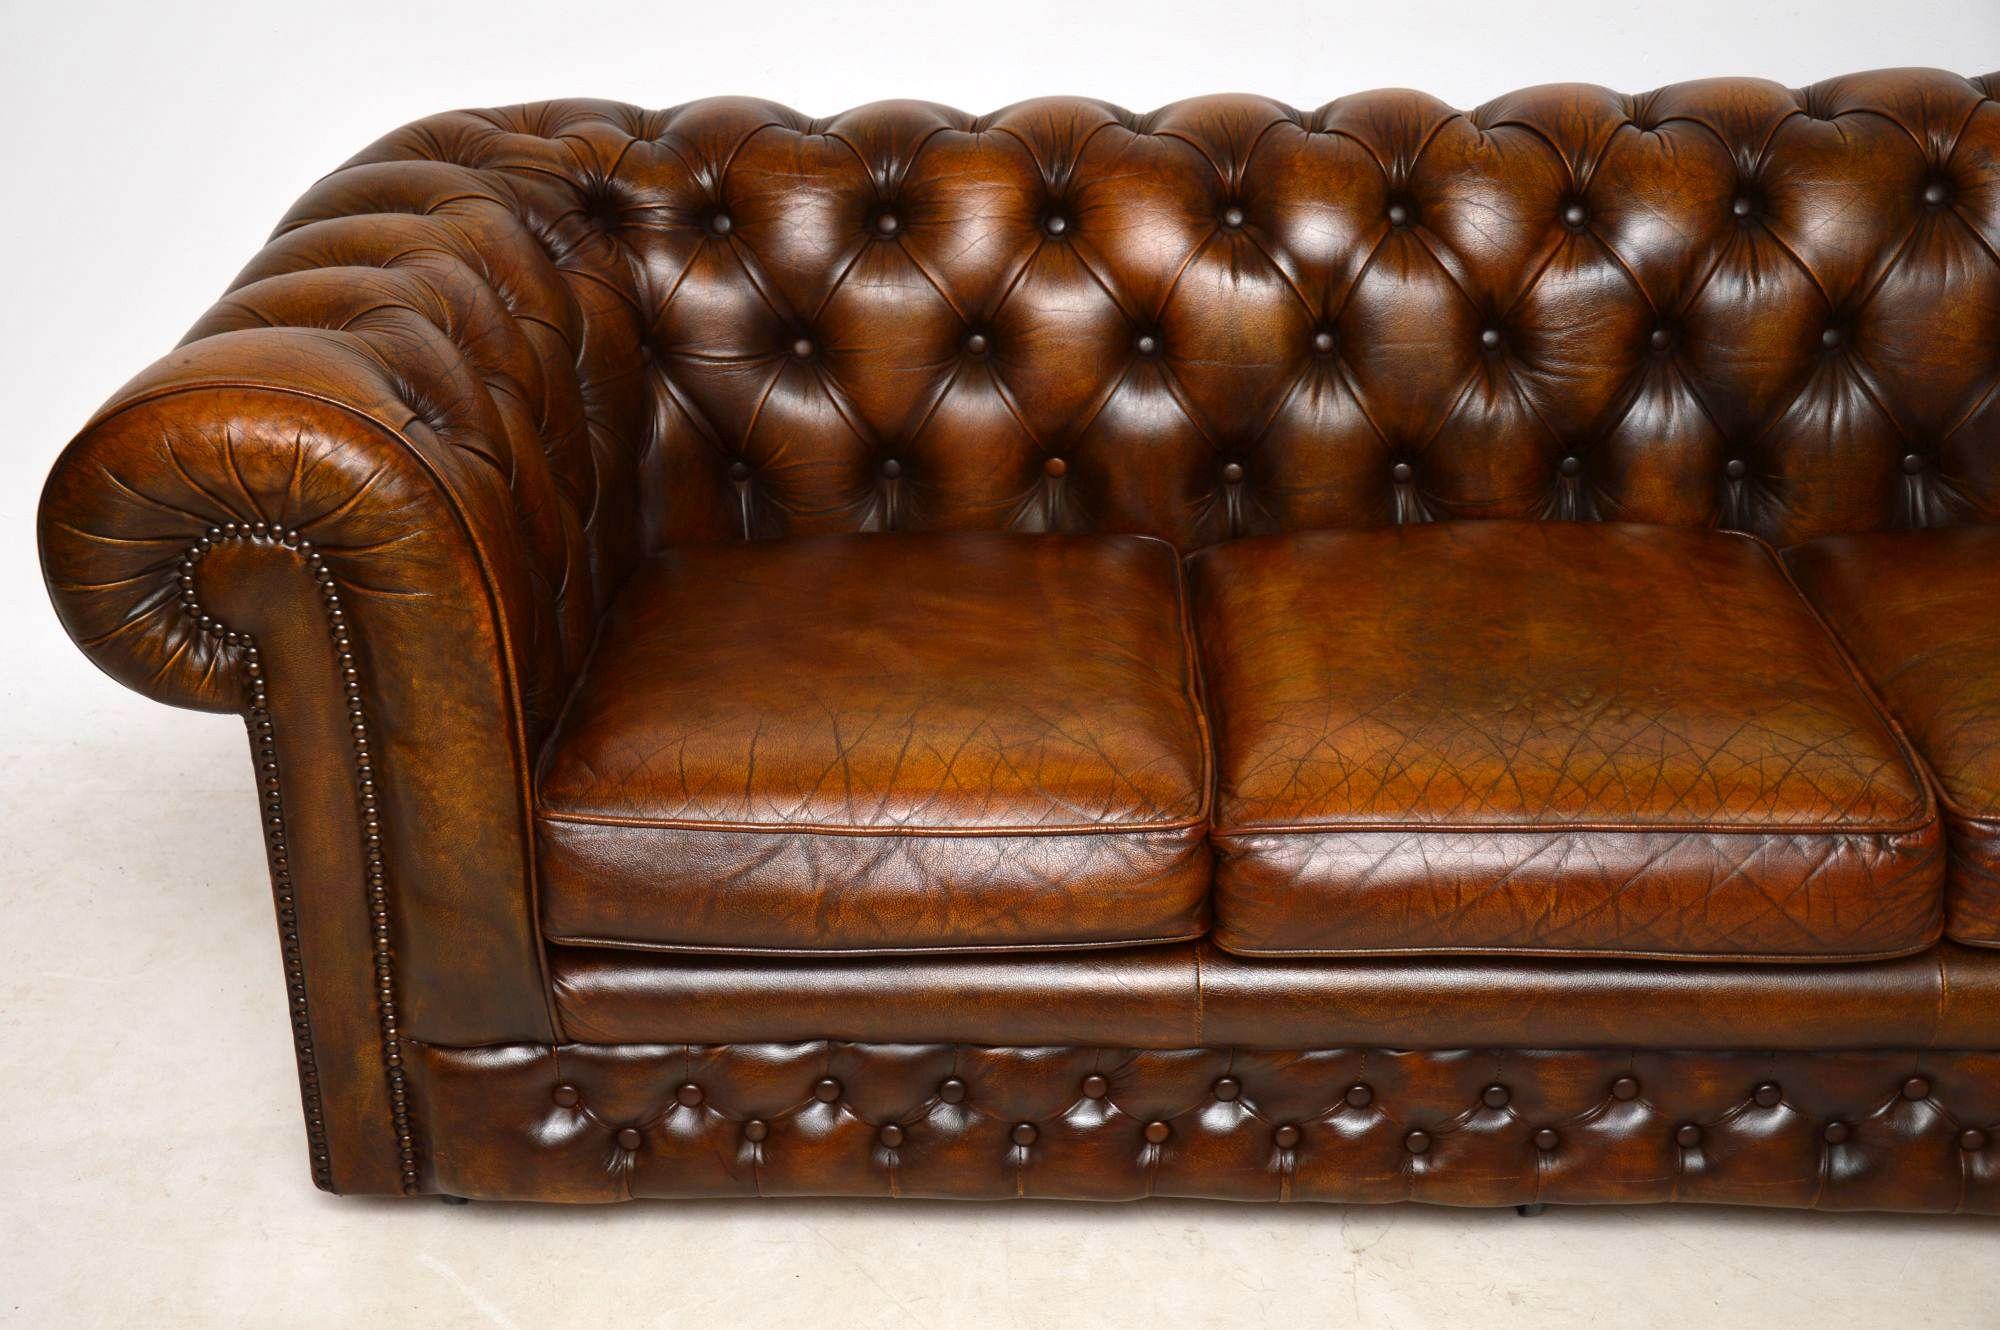 Victorian Antique Deep Buttoned Leather Chesterfield Sofa